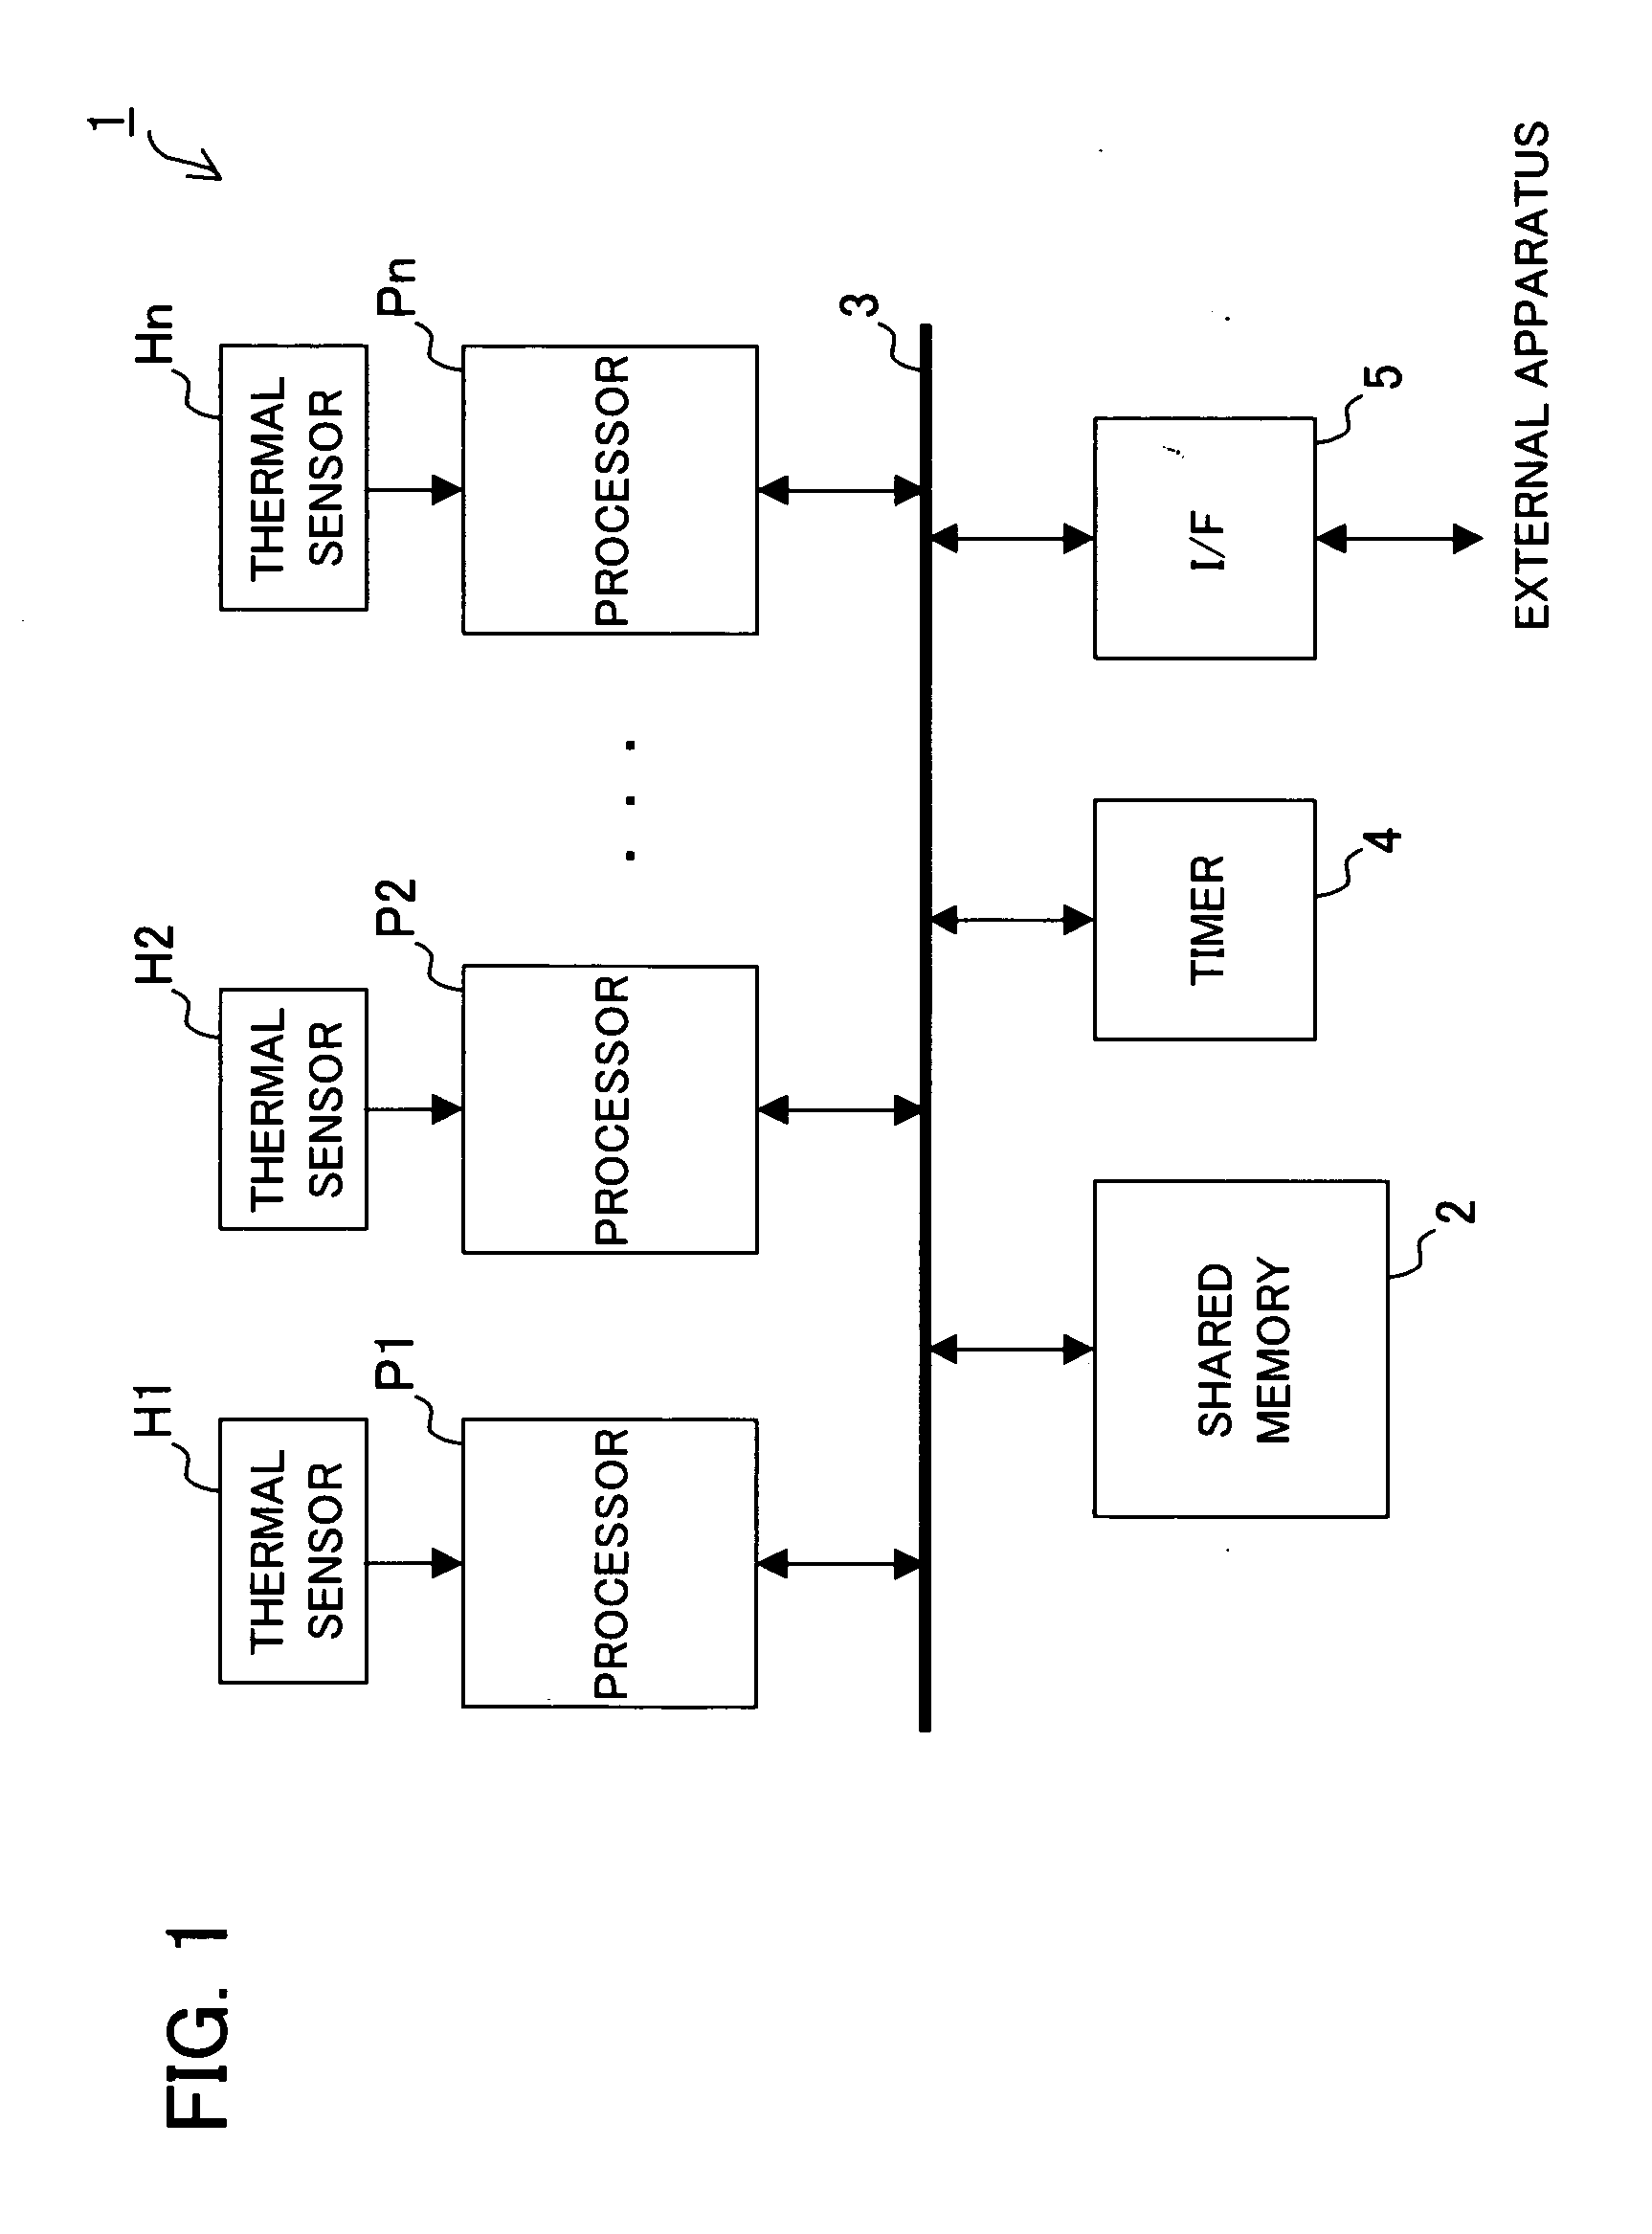 Task scheduling apparatus in distributed processing system